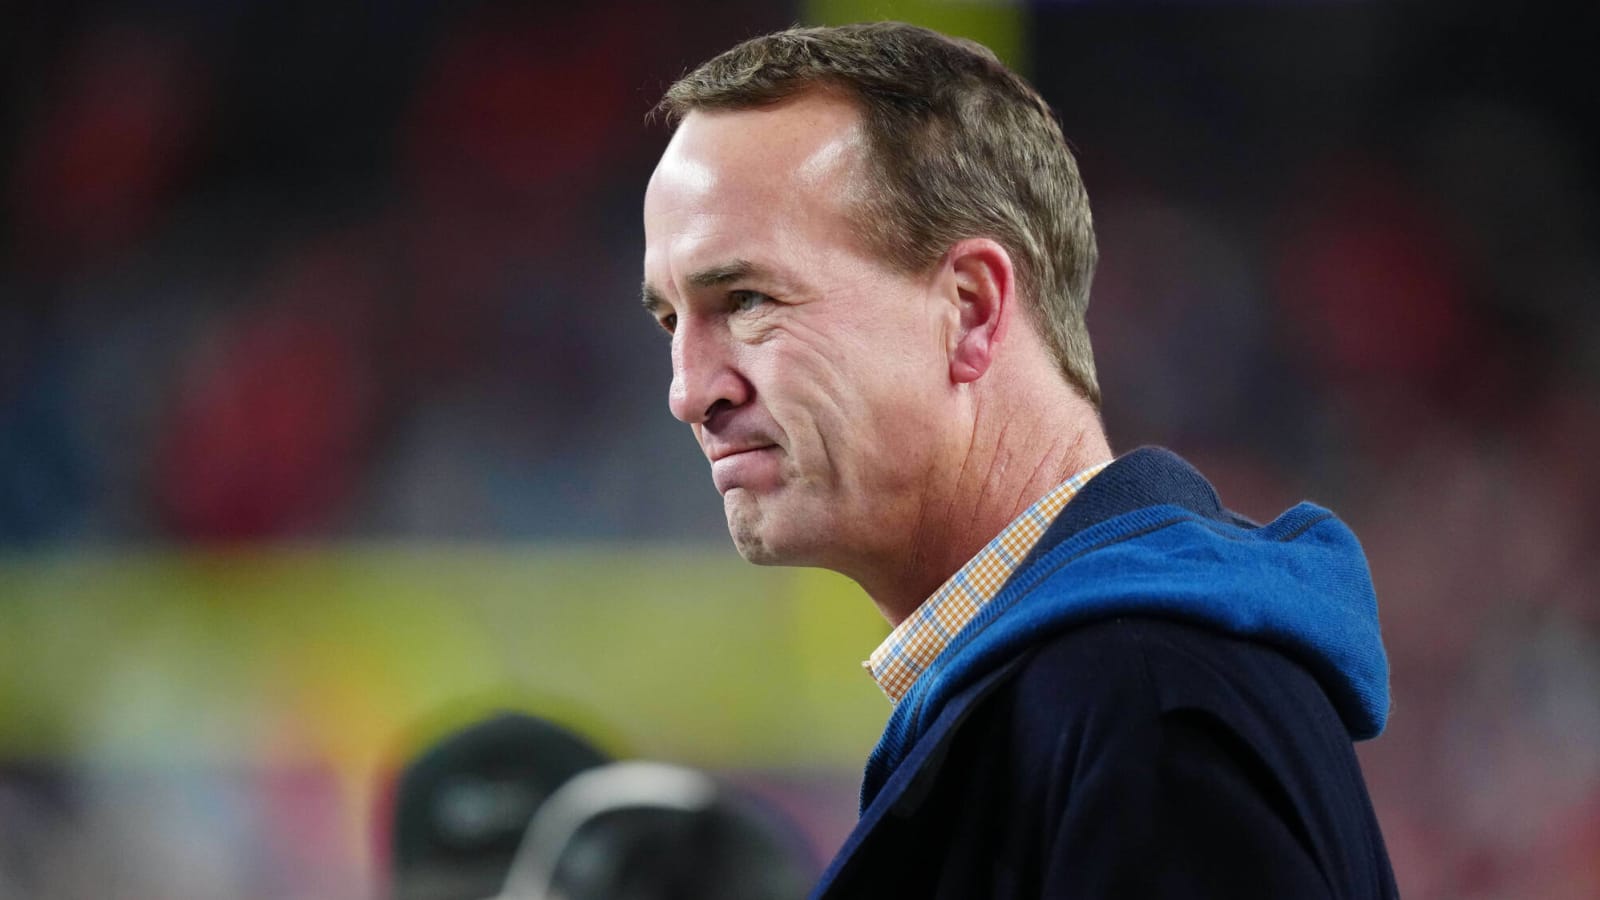 The 10 best options to &#39;roast&#39; Tennessee Vols legend and NFL Hall of Famer Peyton Manning